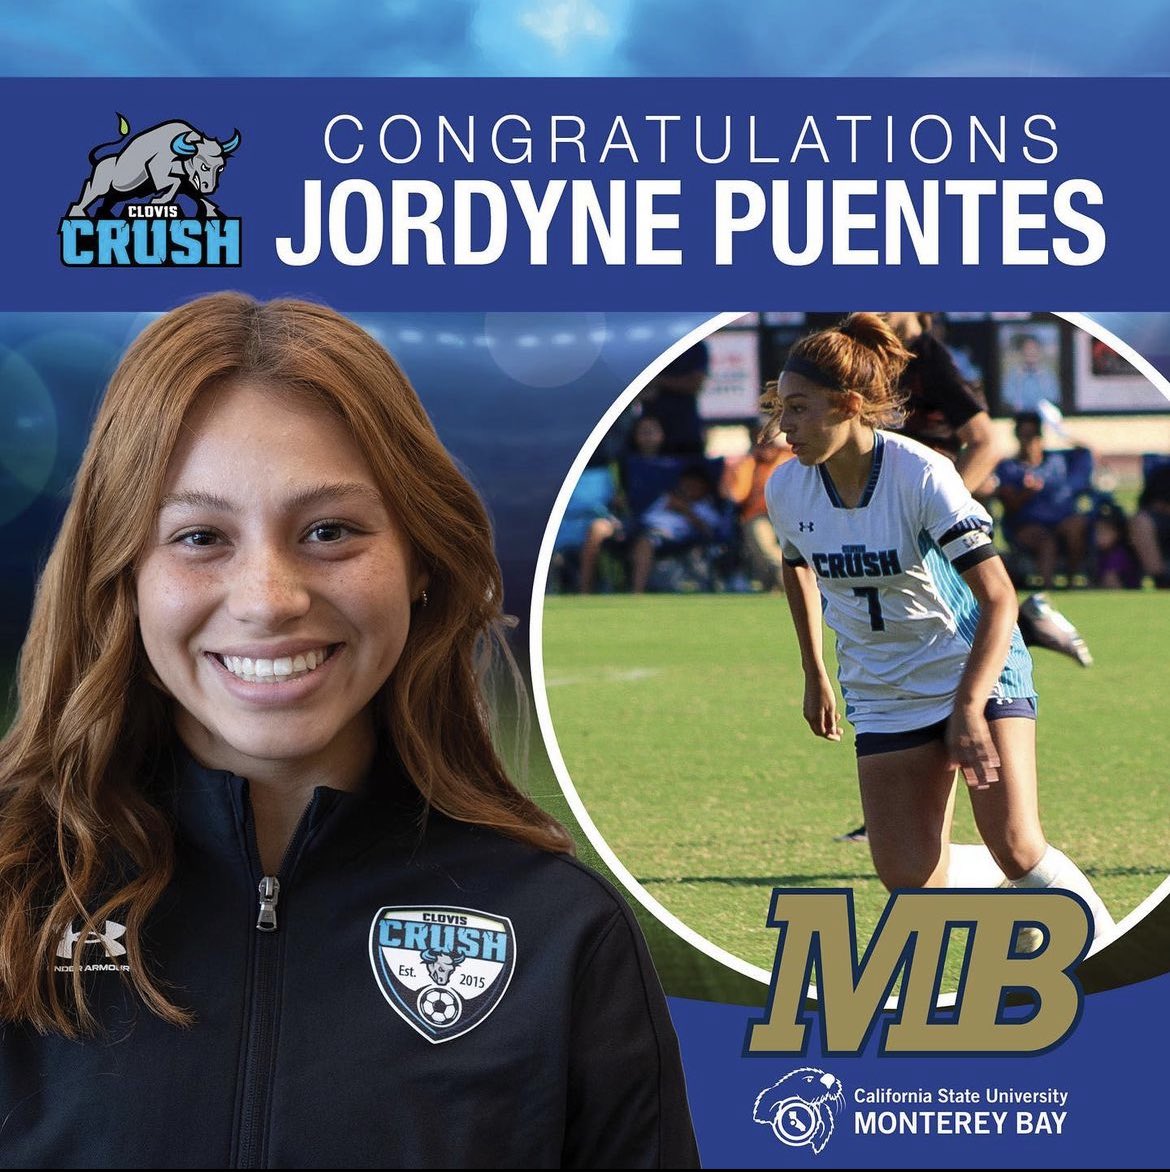 Congtats to Jordyne Puentes on committing to transfer on scholarship to play soccer for CSU Monterey Bay this fall! 

Jordyne scored 18 goals and had 16 assists in 42 GP for the Crush.

#VamosCrush ⚽️